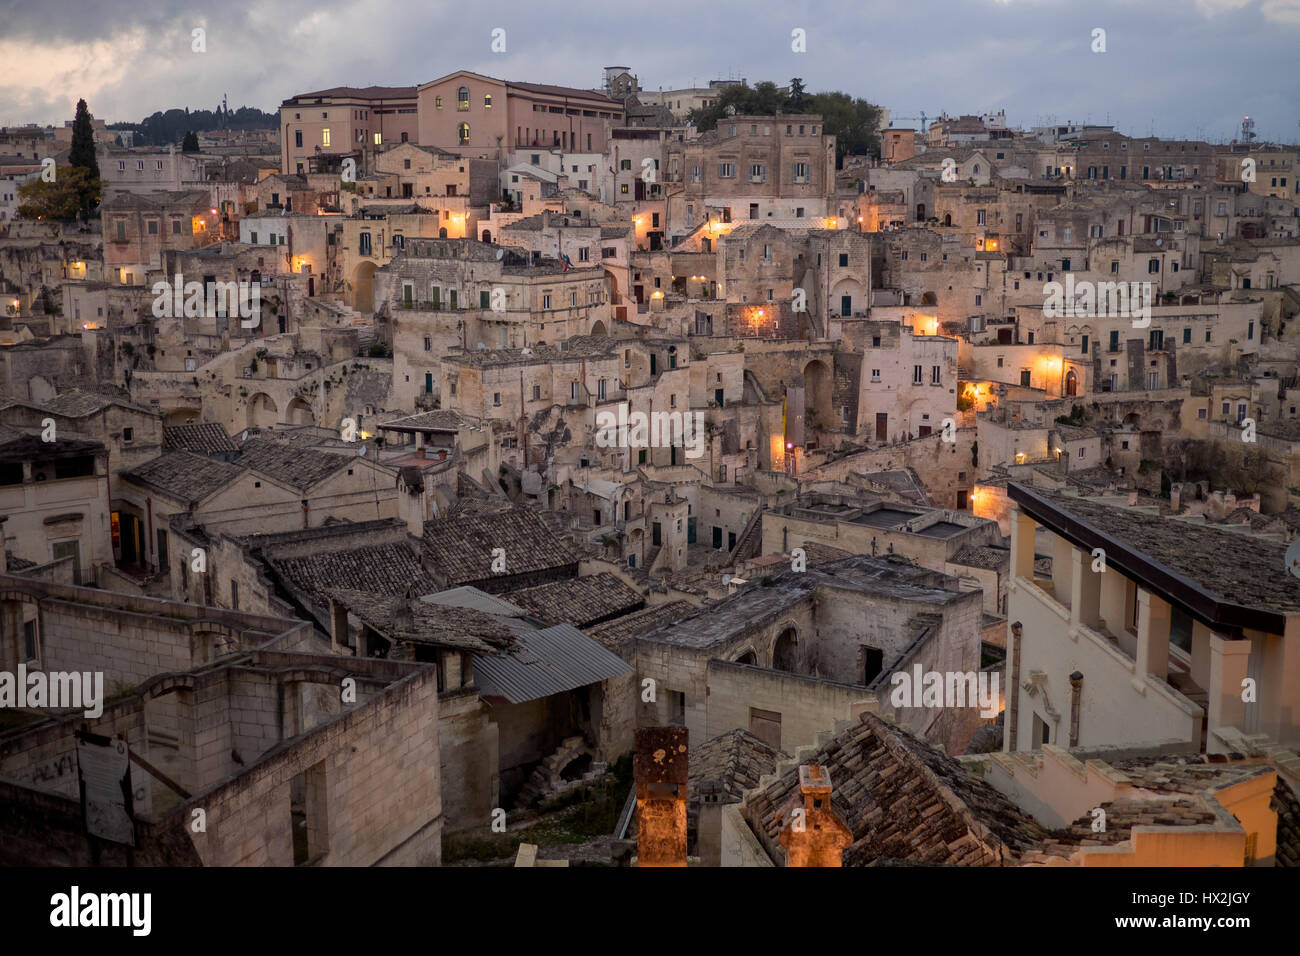 View of Matera at dusk European Capital of Culture 2019 Stock Photo